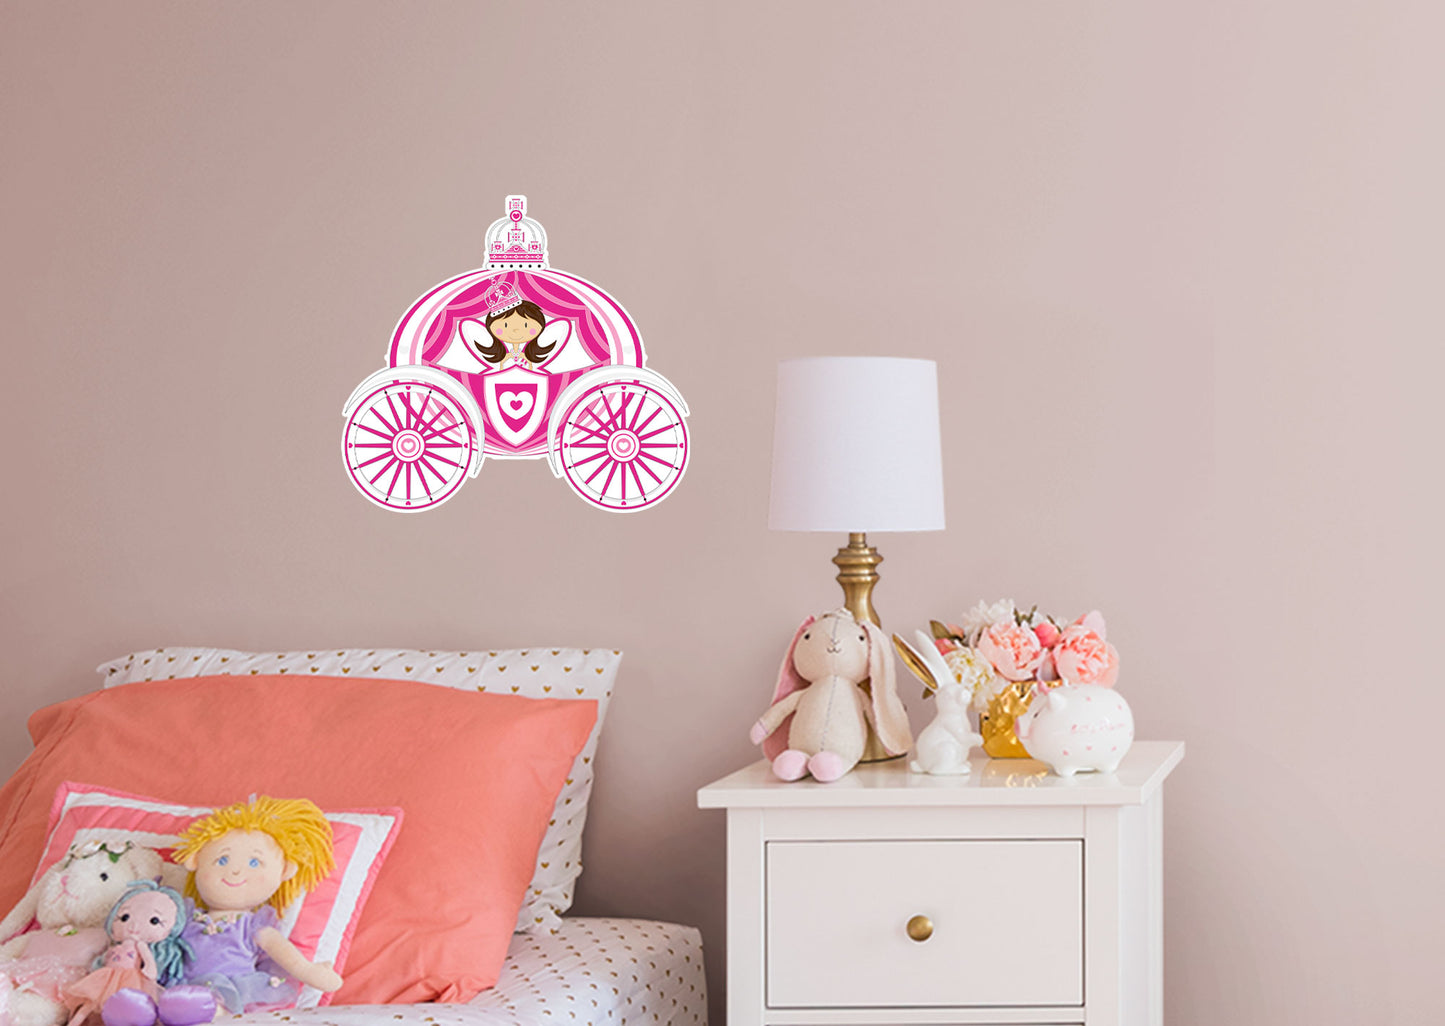 Nursery:  Fancy Carriage Icon        -   Removable     Adhesive Decal